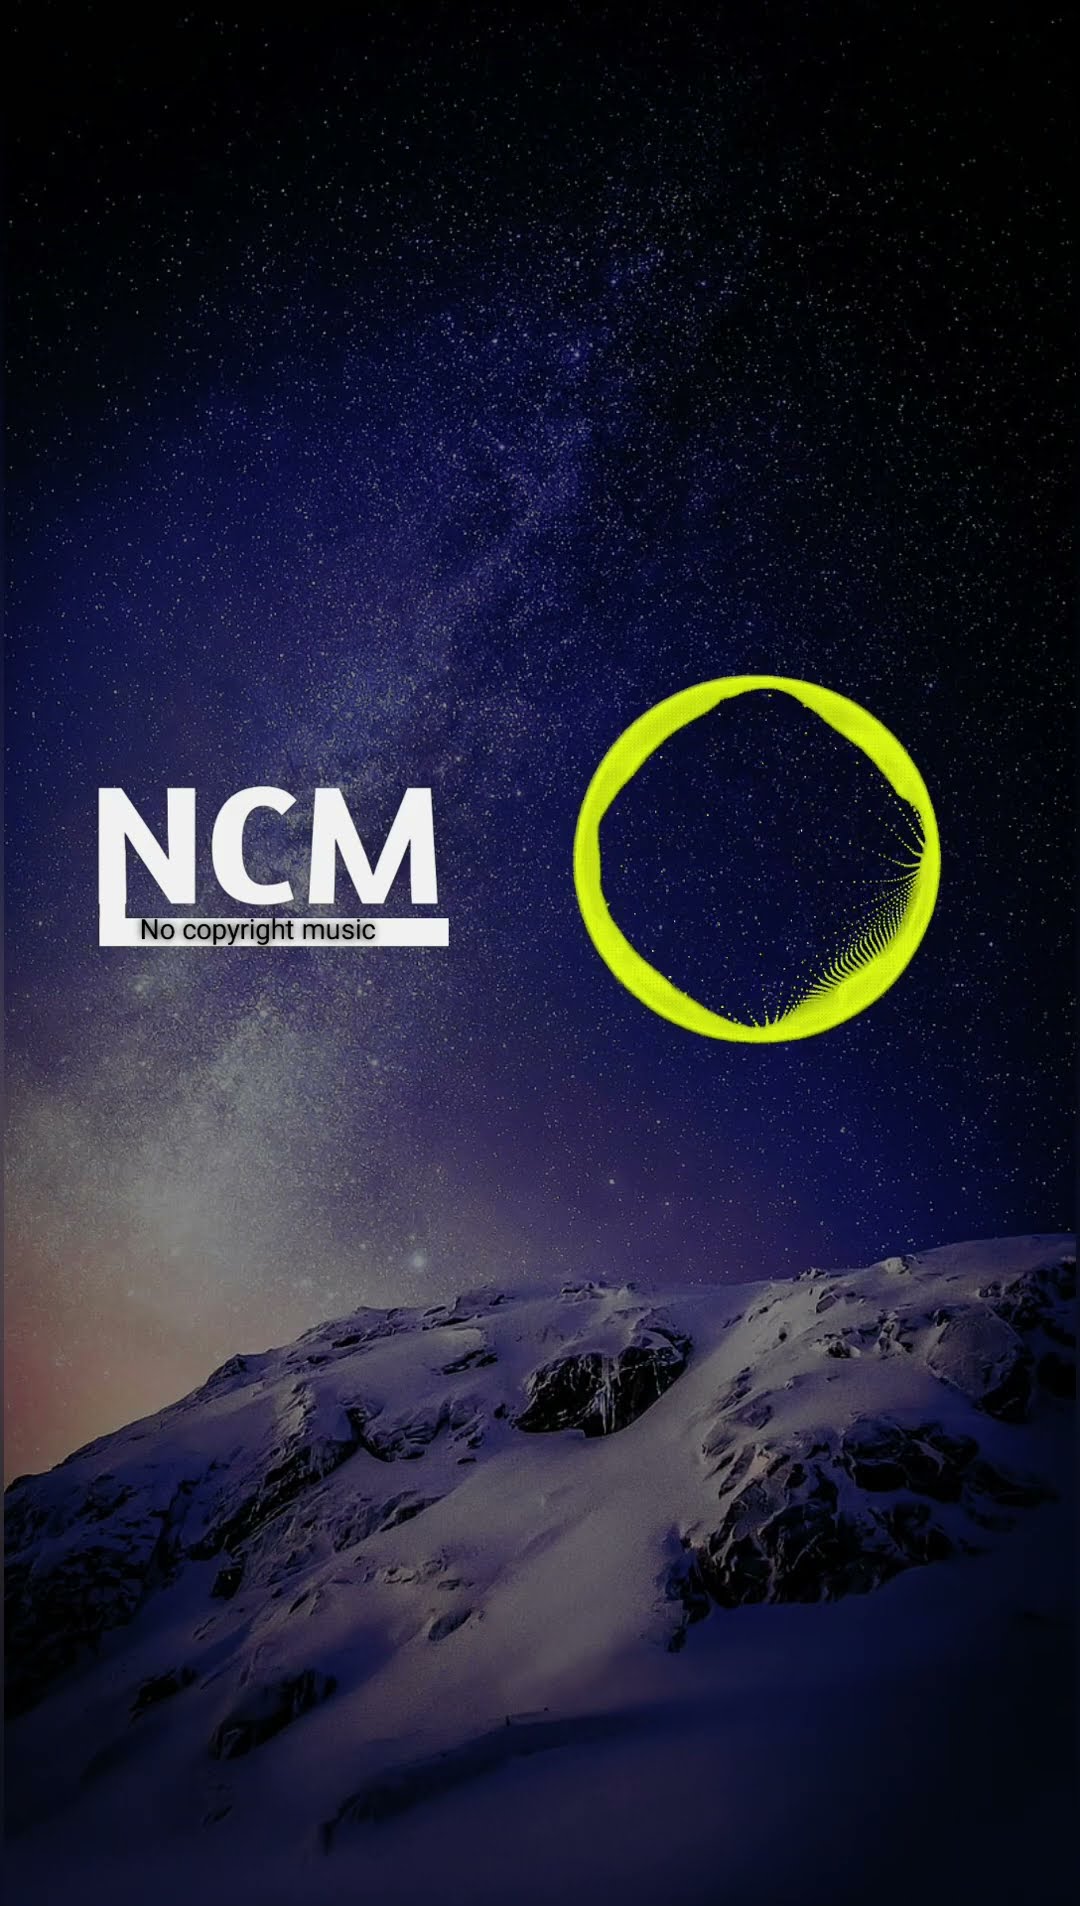 Facading - Tonight [NCS Release]EDM songs. #copyright #edm #no #ncs #royalty #on #remix #alan #new